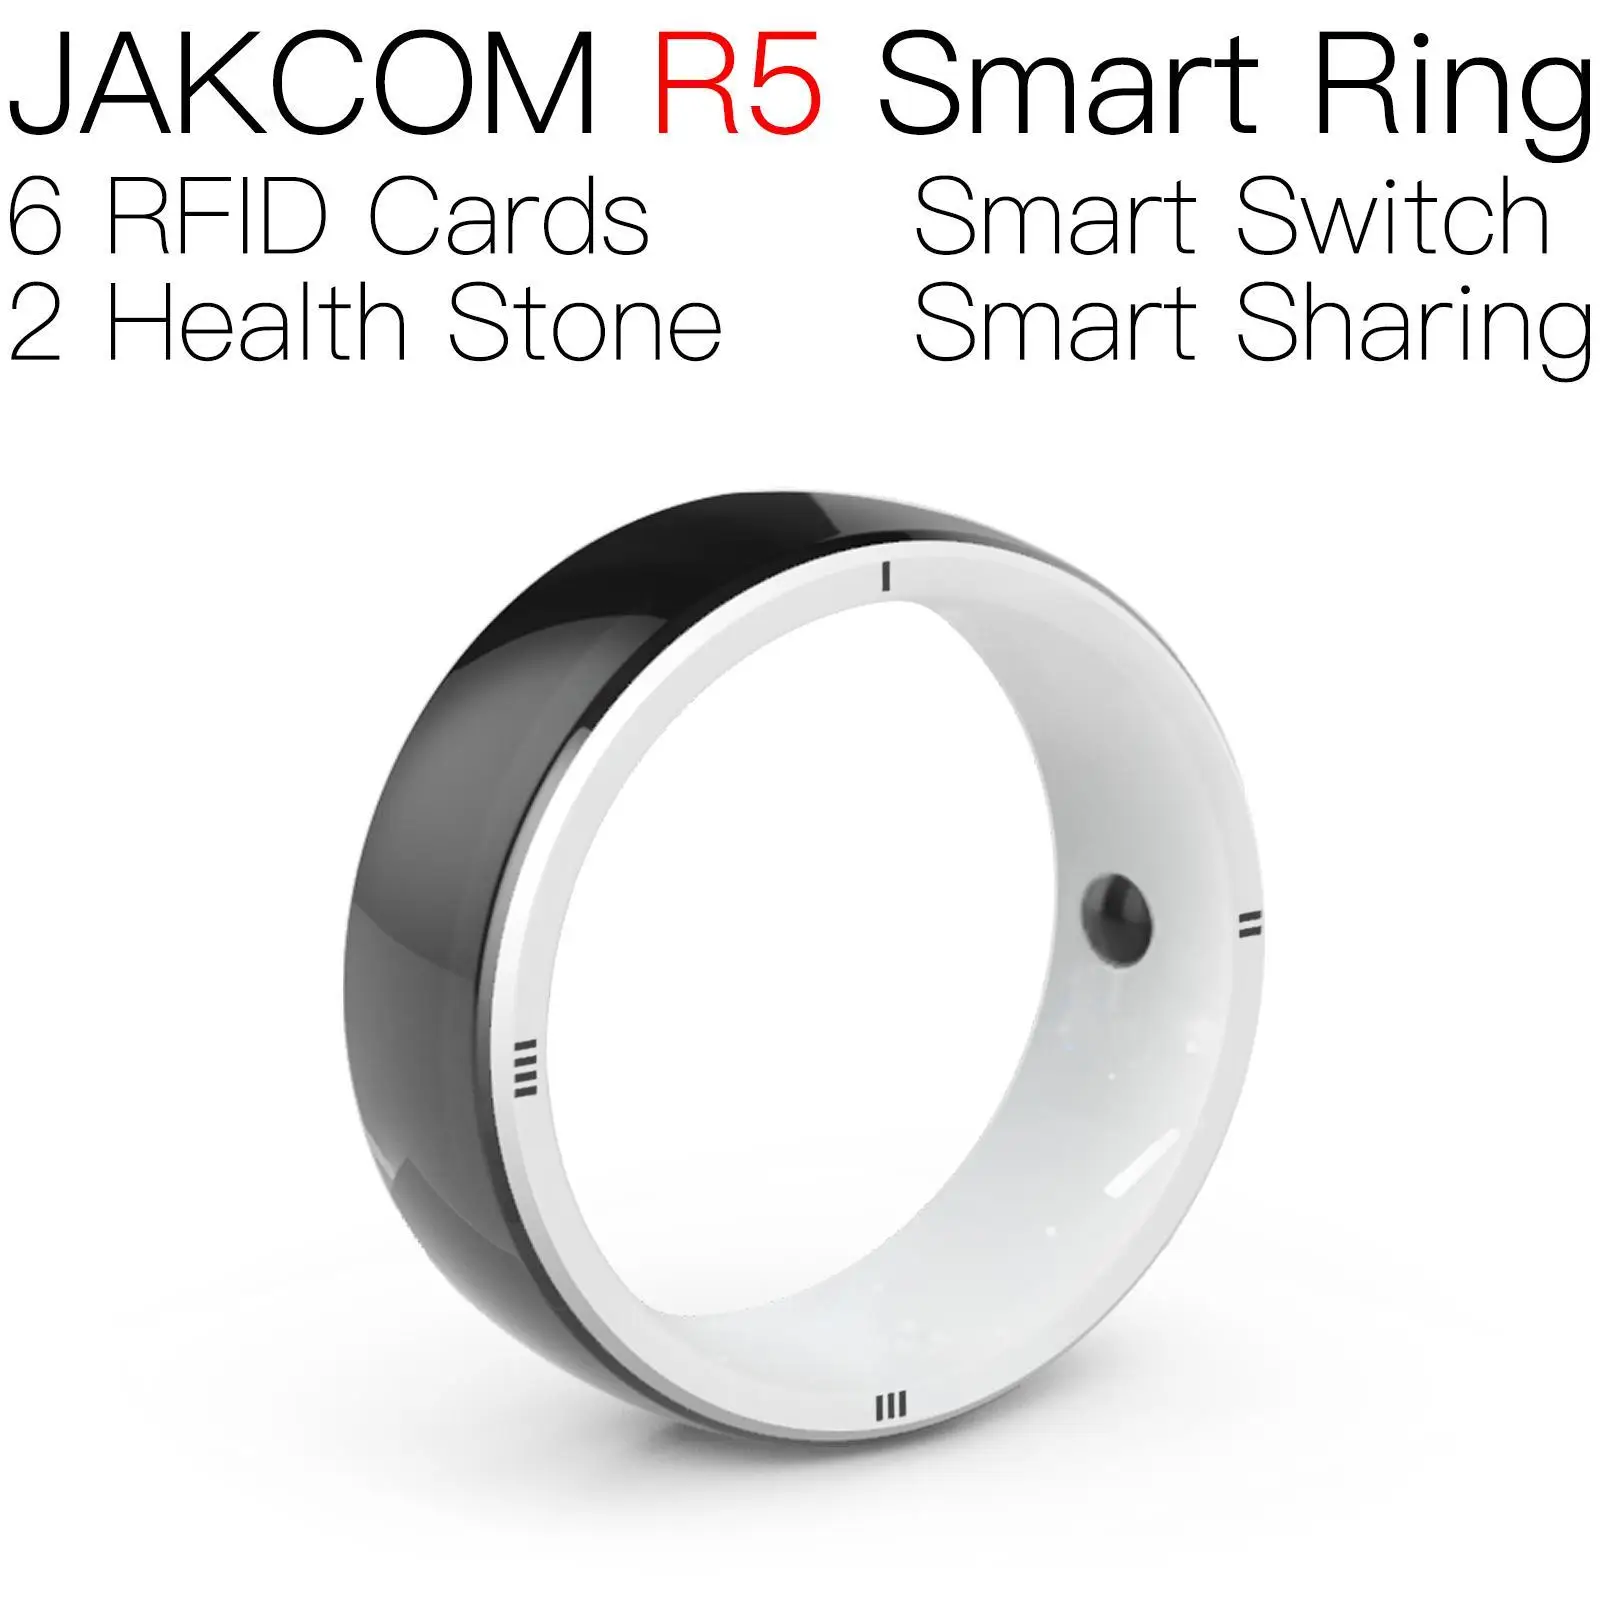 

JAKCOM R5 Smart Ring better than chip ntag 215 25mm nfc impermeable rfid ear tag uhf tags long distance pet 125khz implant